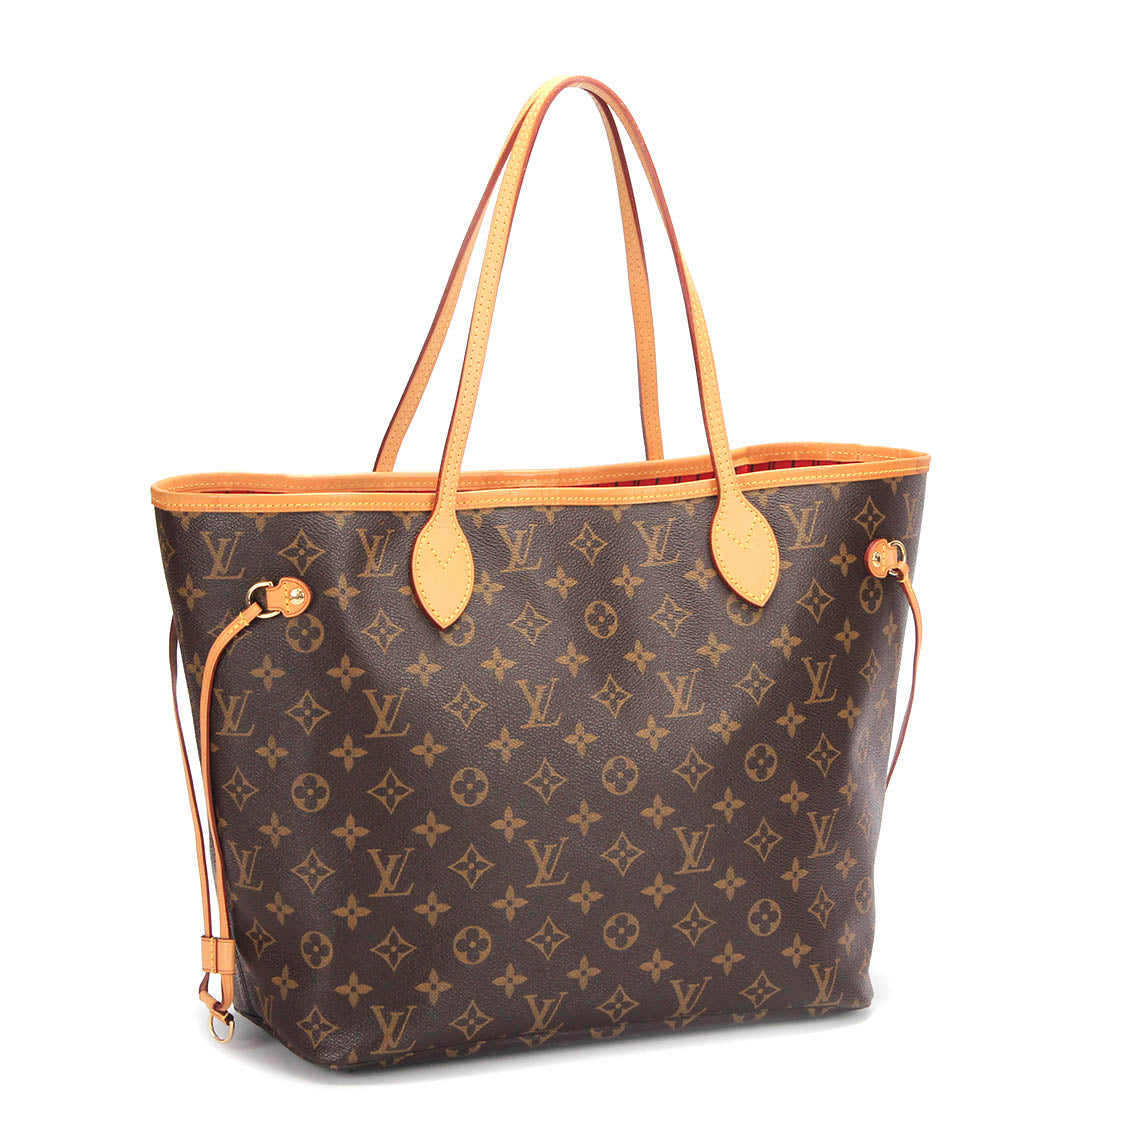 Louis Vuitton Monogram Neverfull MM with Pouch Canvas Tote Bag M41177 in Excellent condition